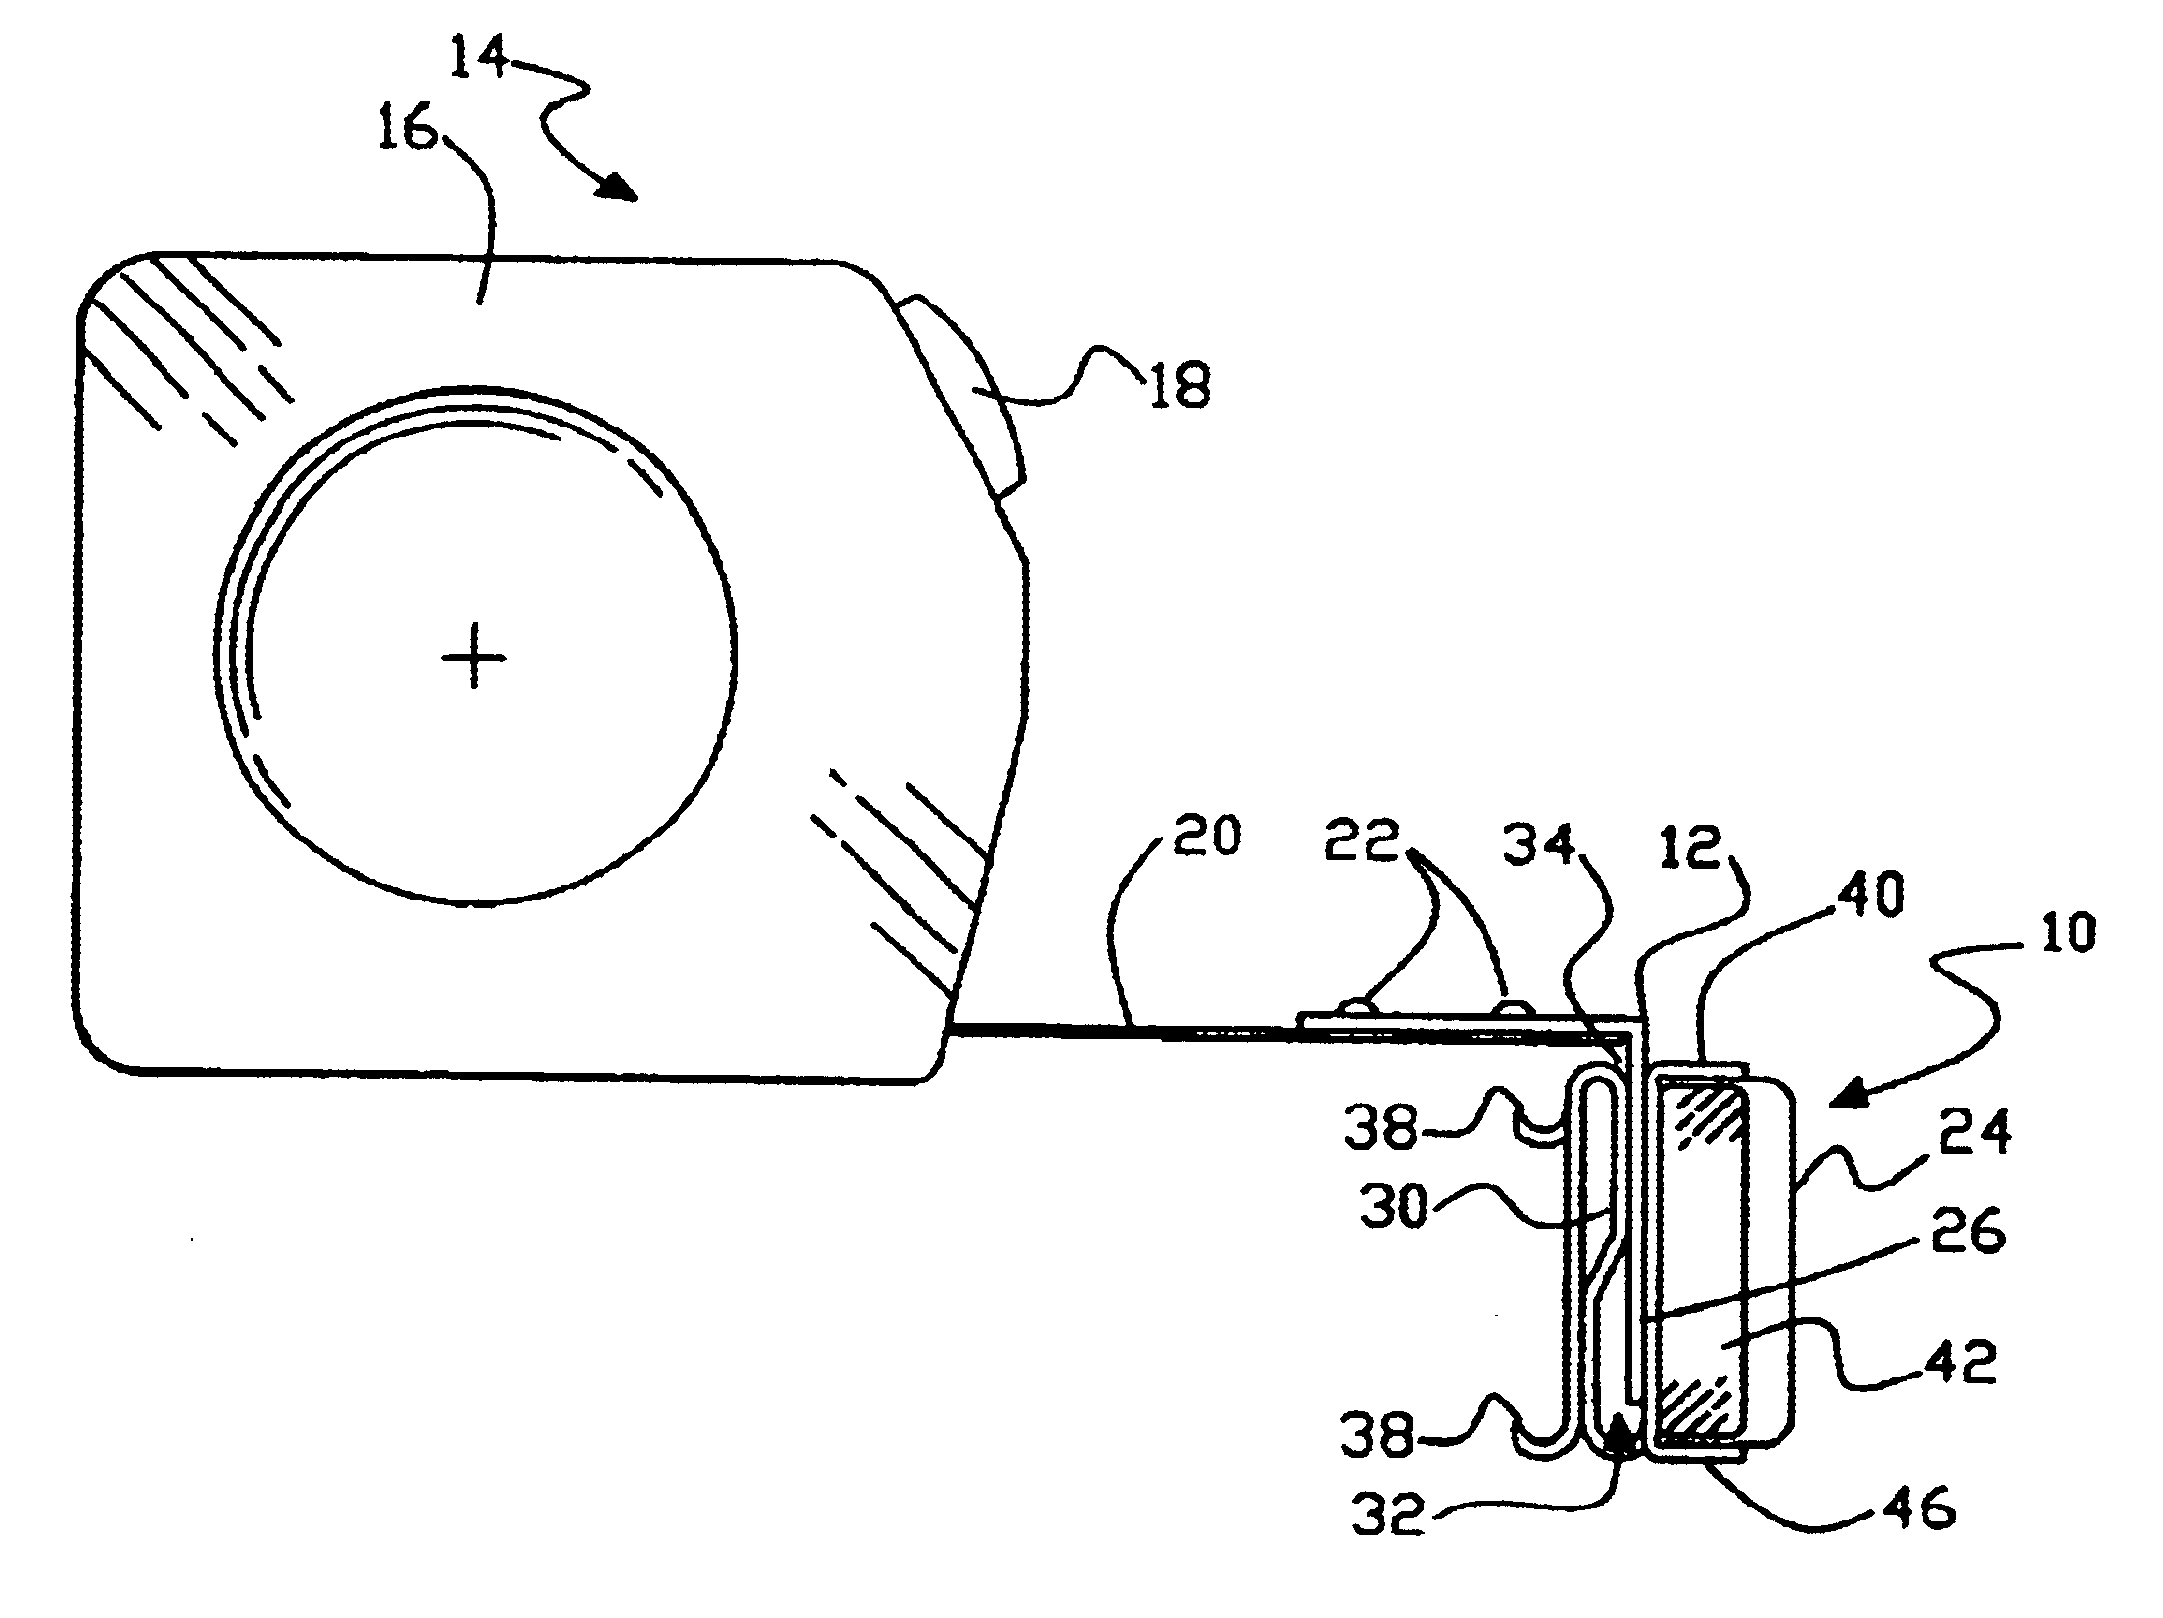 Removable attachment device for tape measure